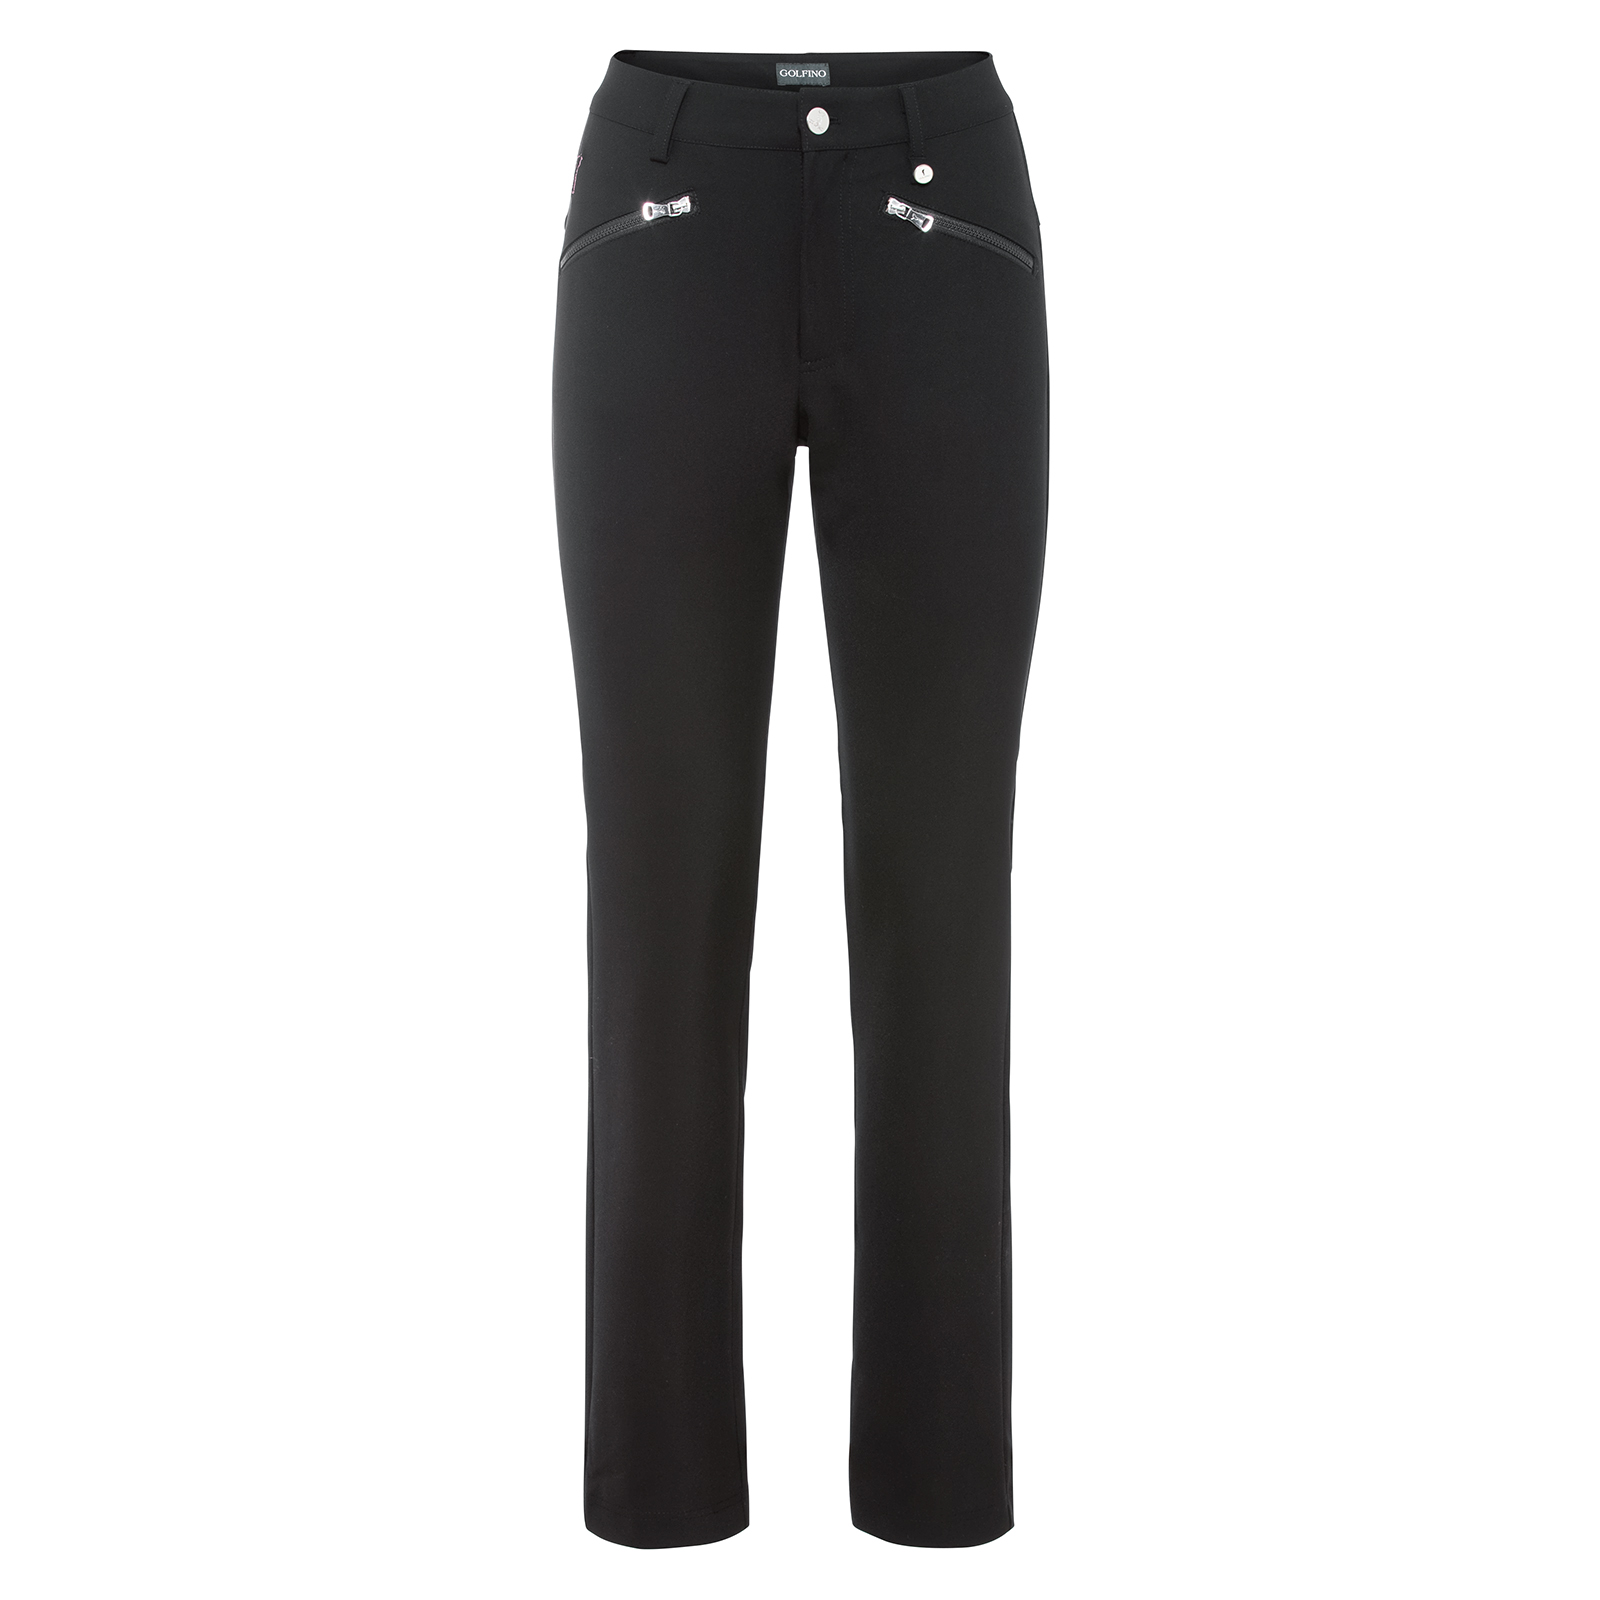 Water repellent ladies' golf trousers in attractive 7/8 length